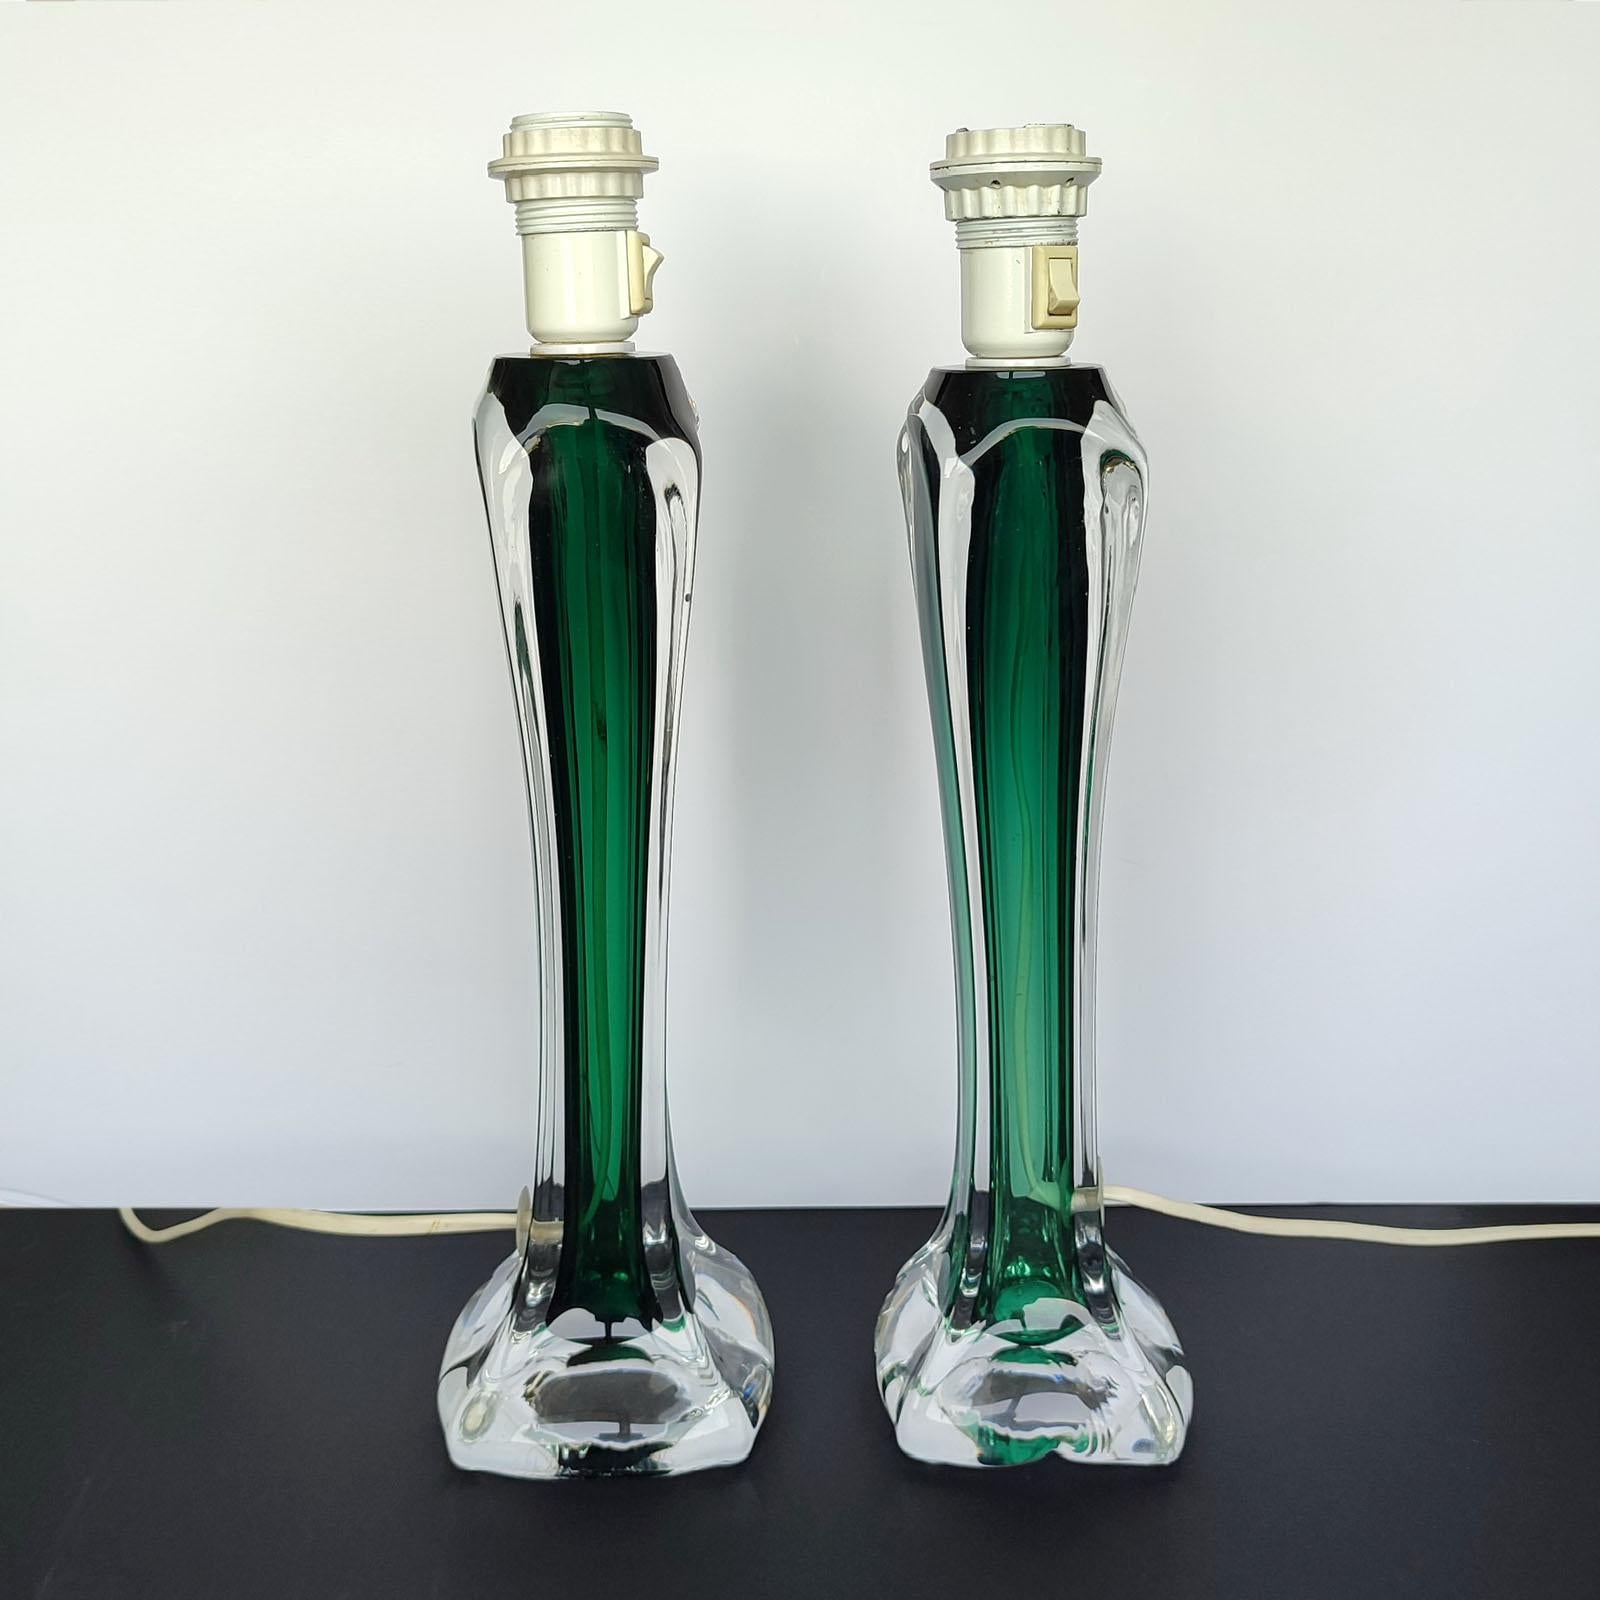 Mid-20th Century Mid-Century Modern Paul Kedelv Flygsfors Green Glass Table Lamps, Sweden, 1950s For Sale